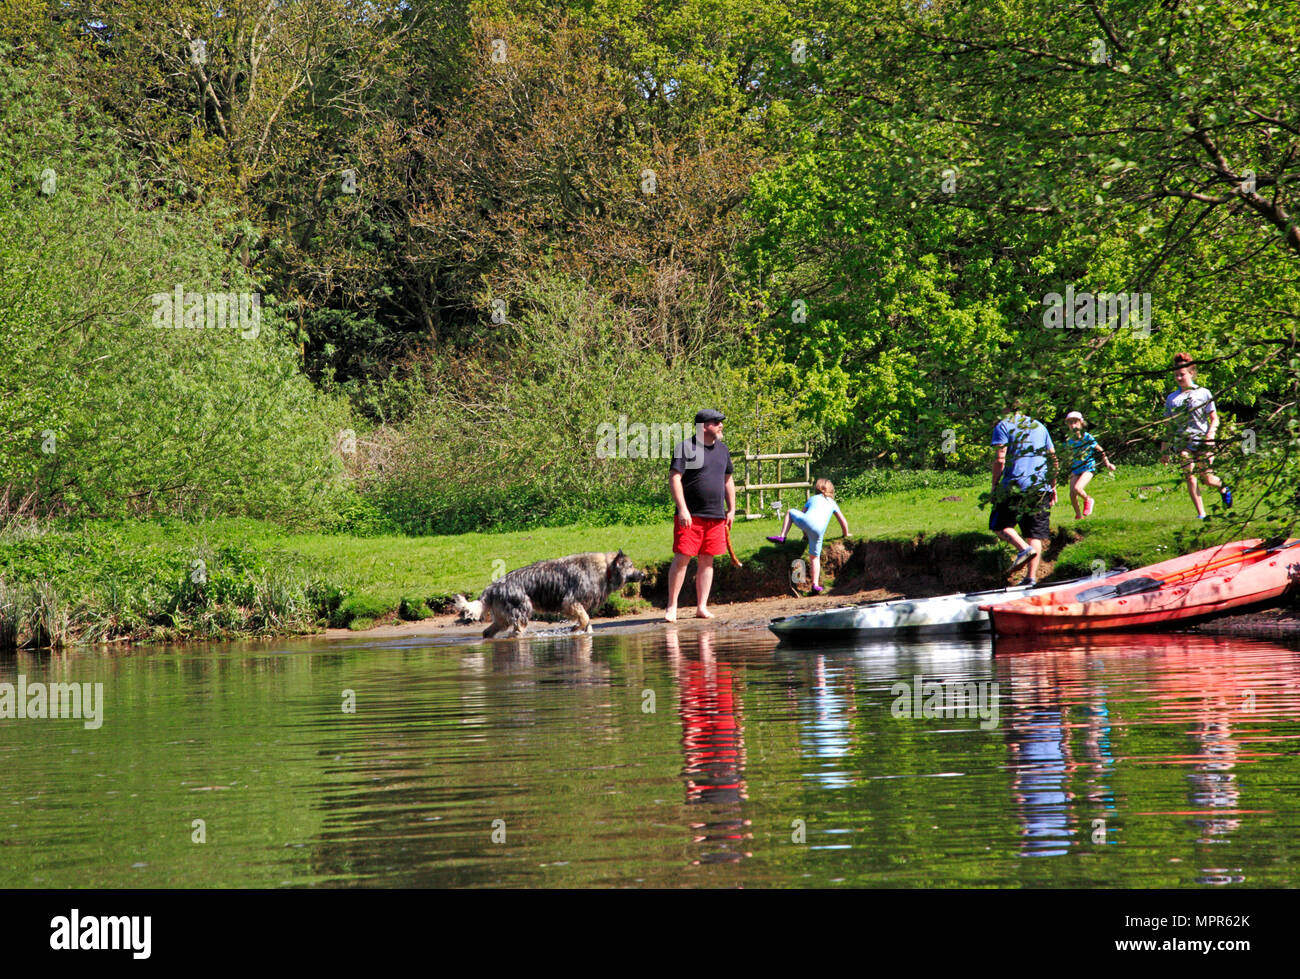 A family having fun by the River Bure on the Norfolk Broads near Wroxham, Norfolk, England, United Kingdom, Europe. Stock Photo